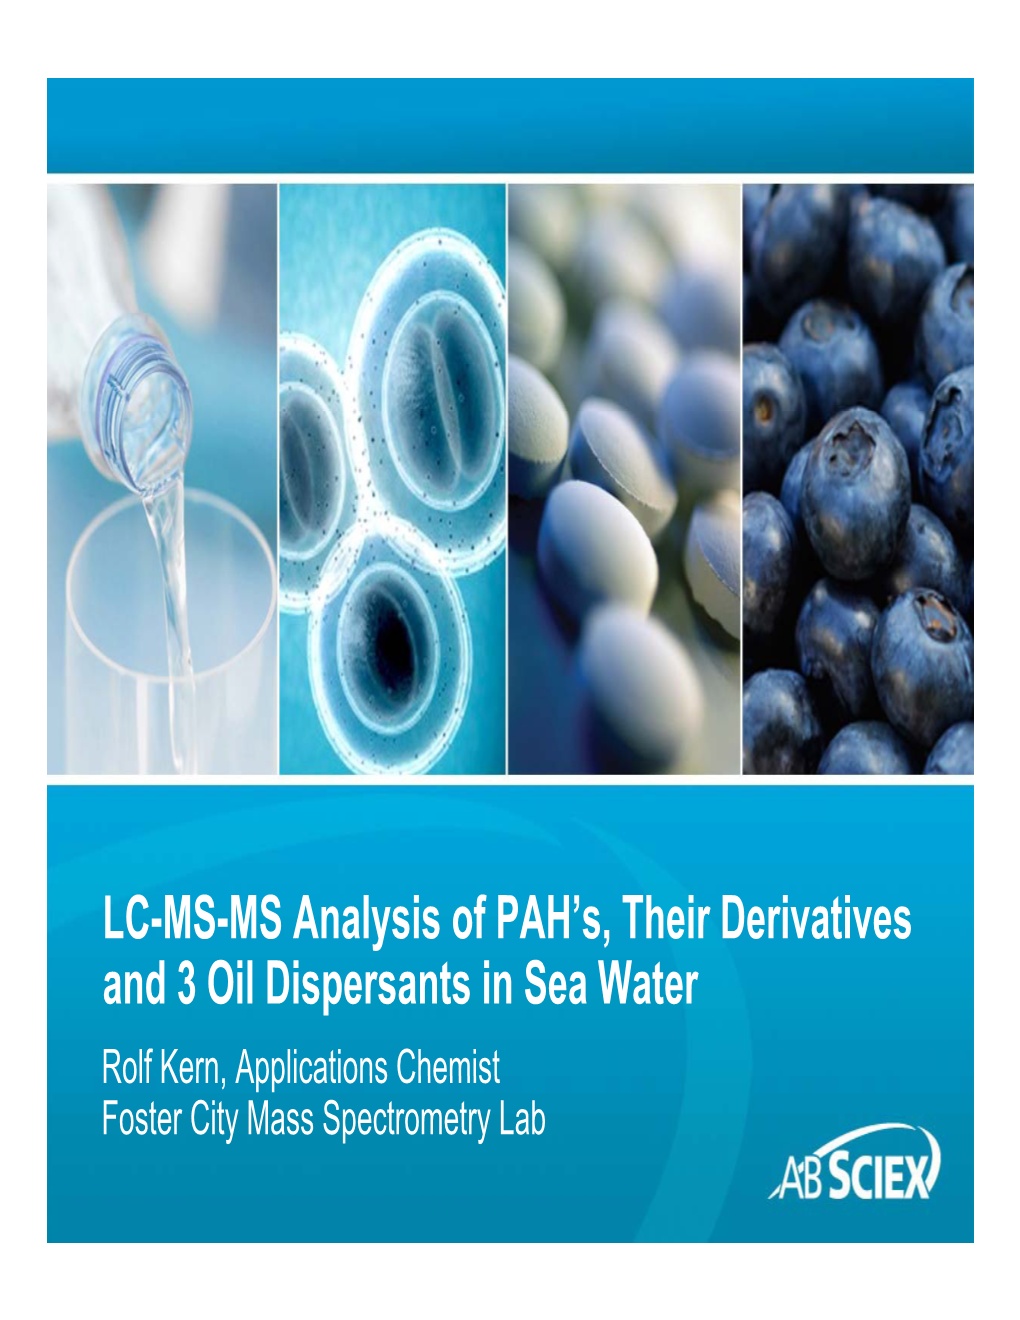 LC/MS/MS Analysis of PAH's, Their Derivatives, and 3 Oil Dispersants